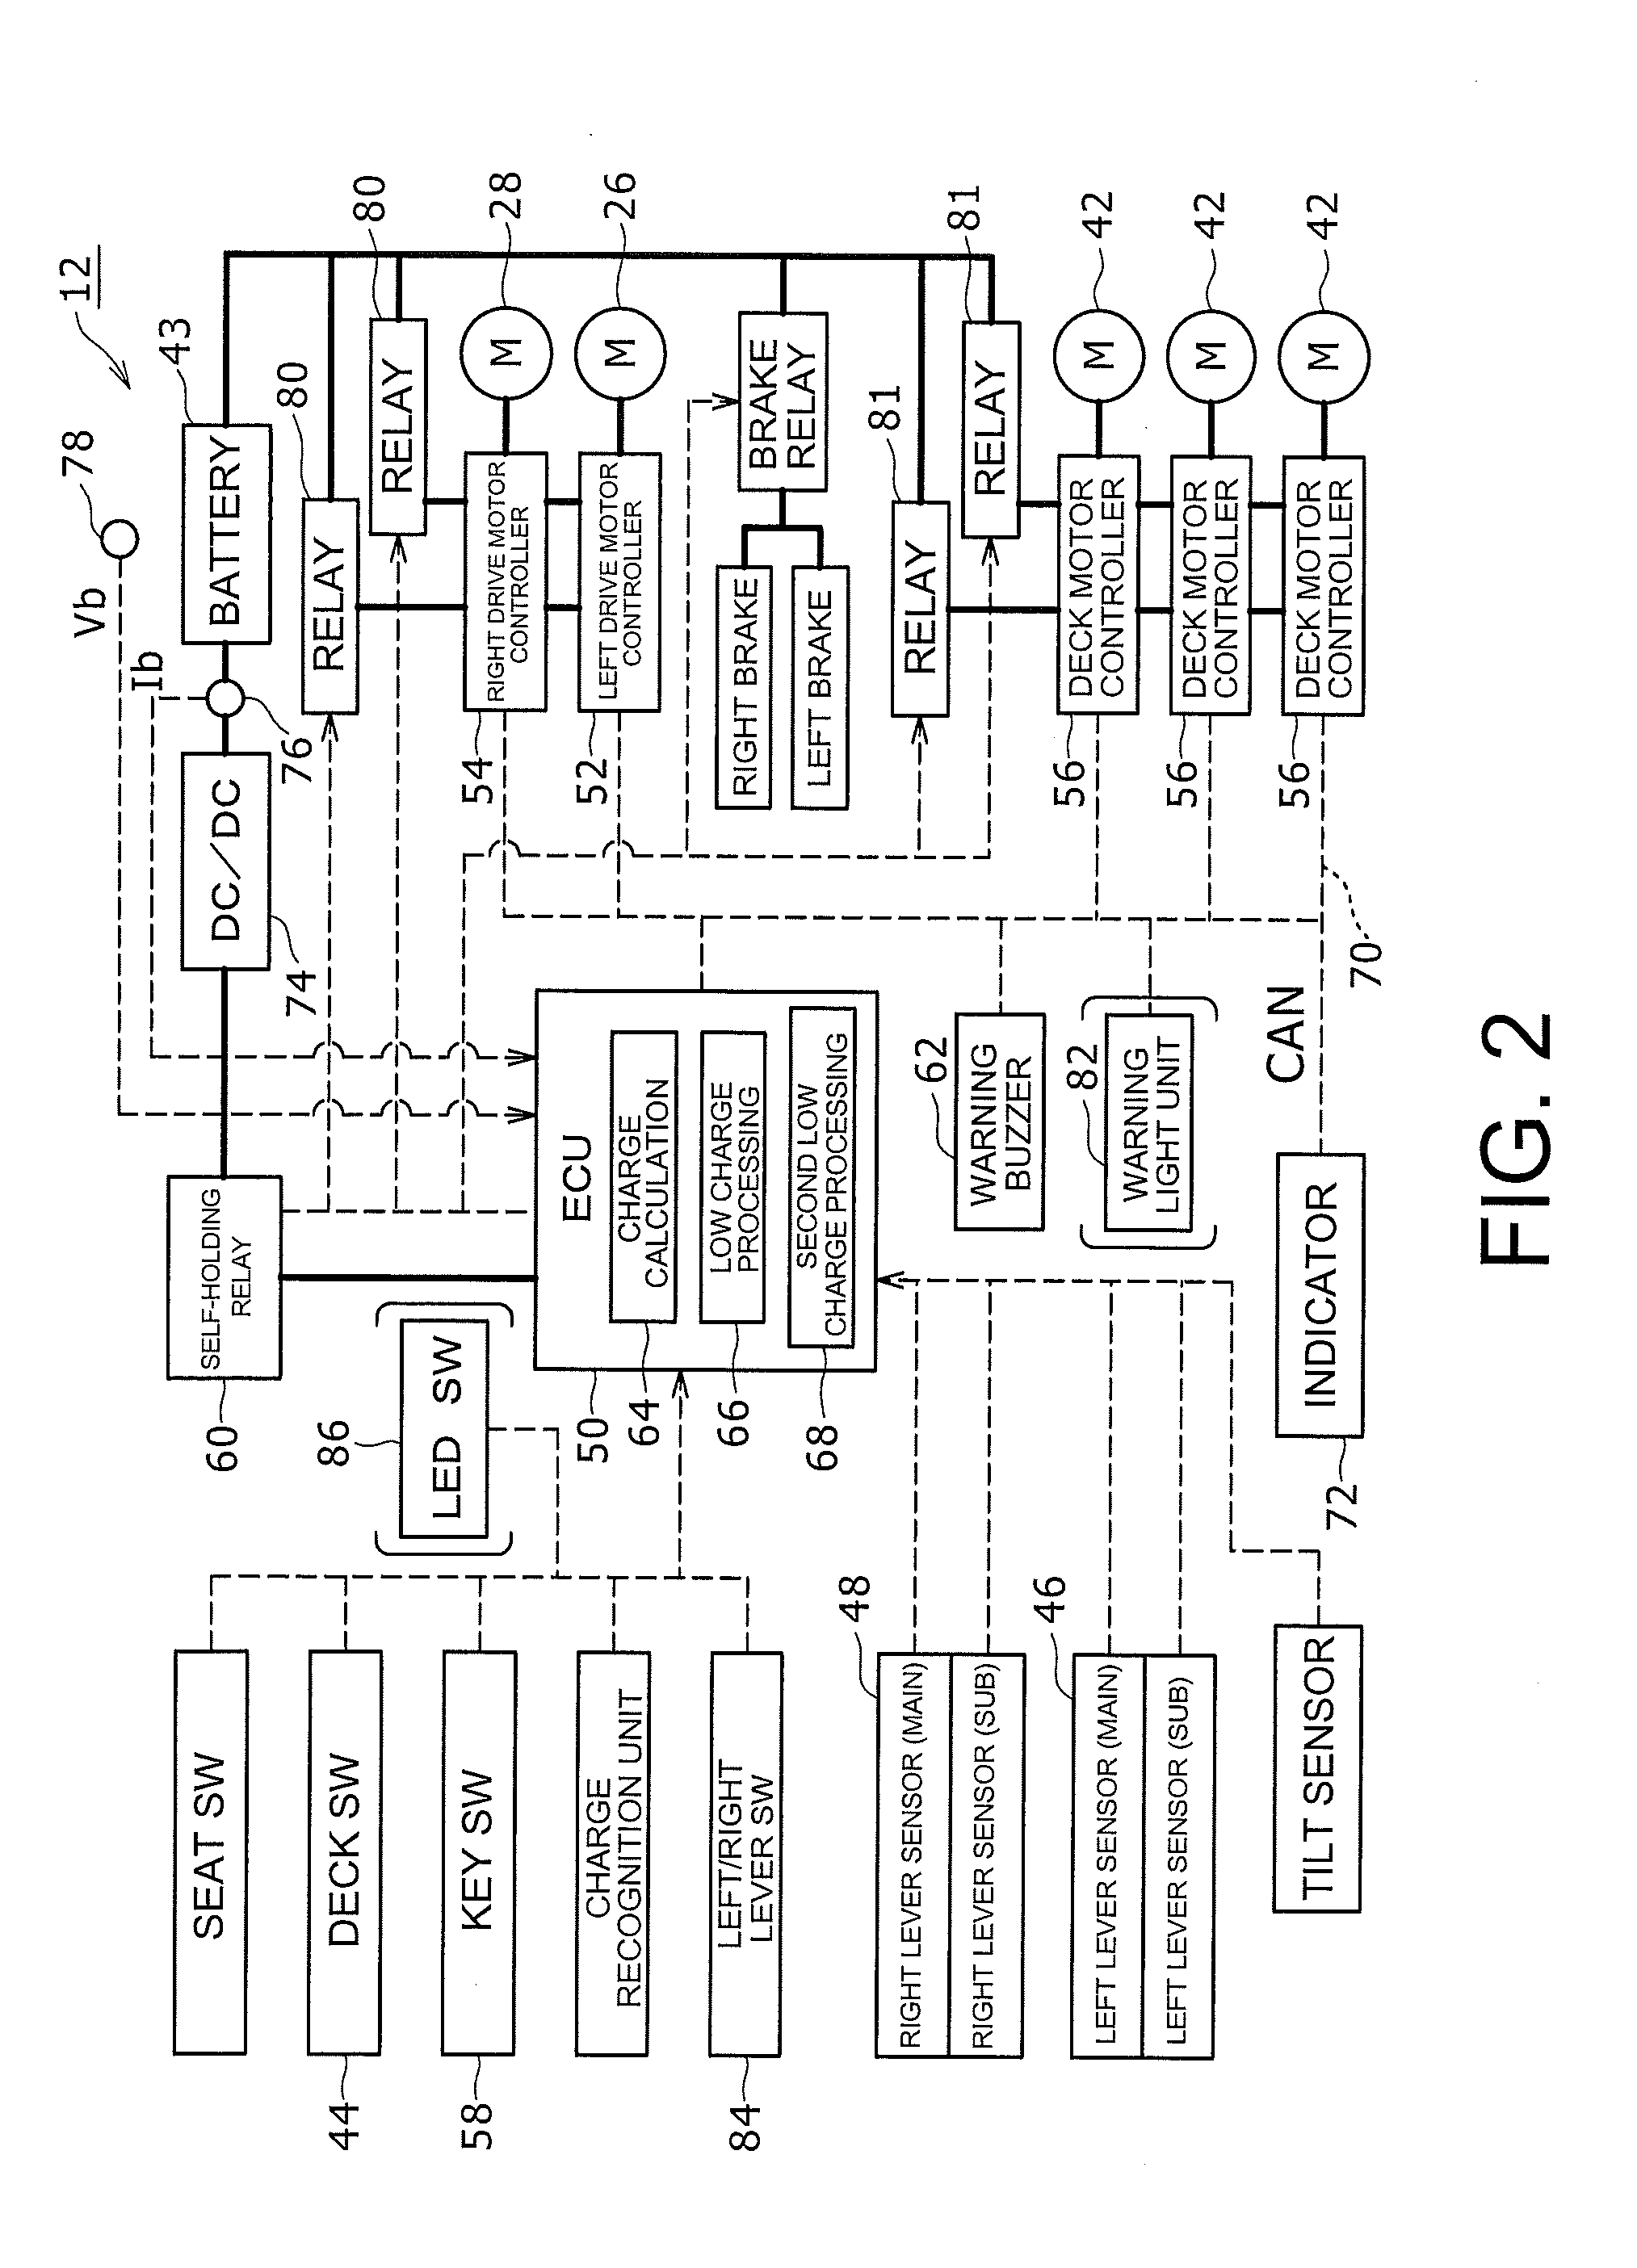 Motor control system and control system for electric motor-driven vehicle